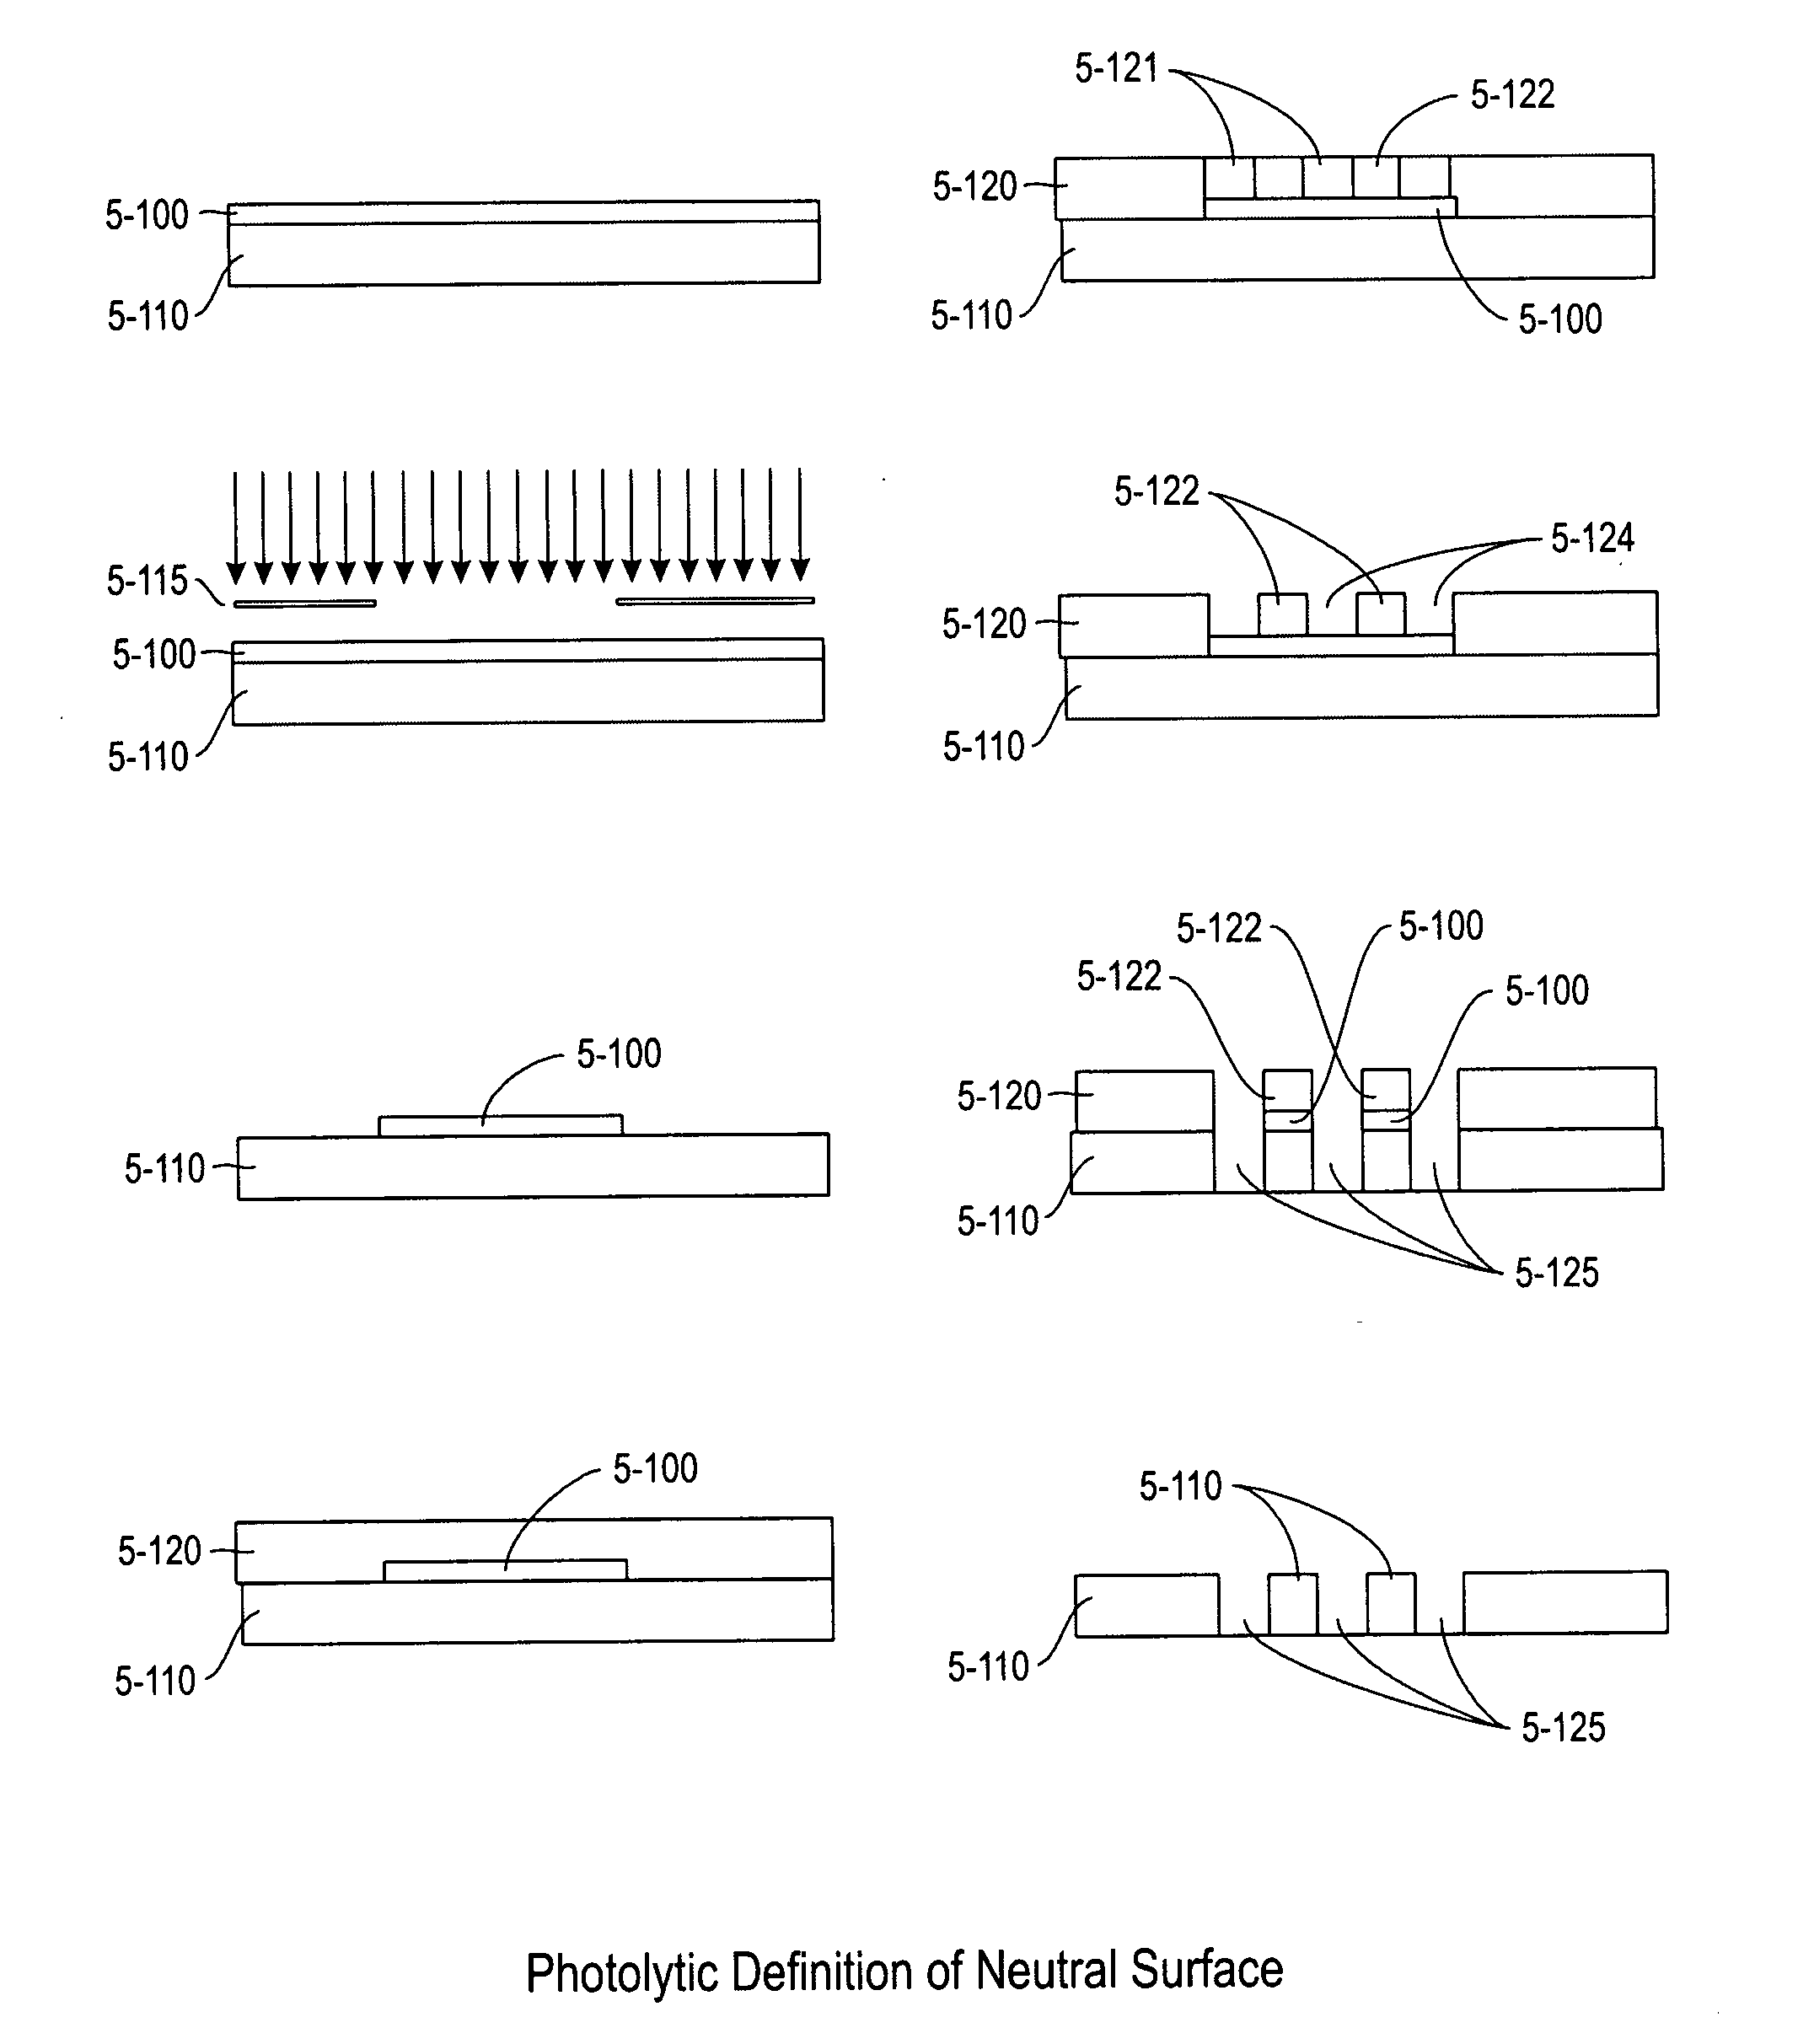 Method and materials for patterning a neutral surface